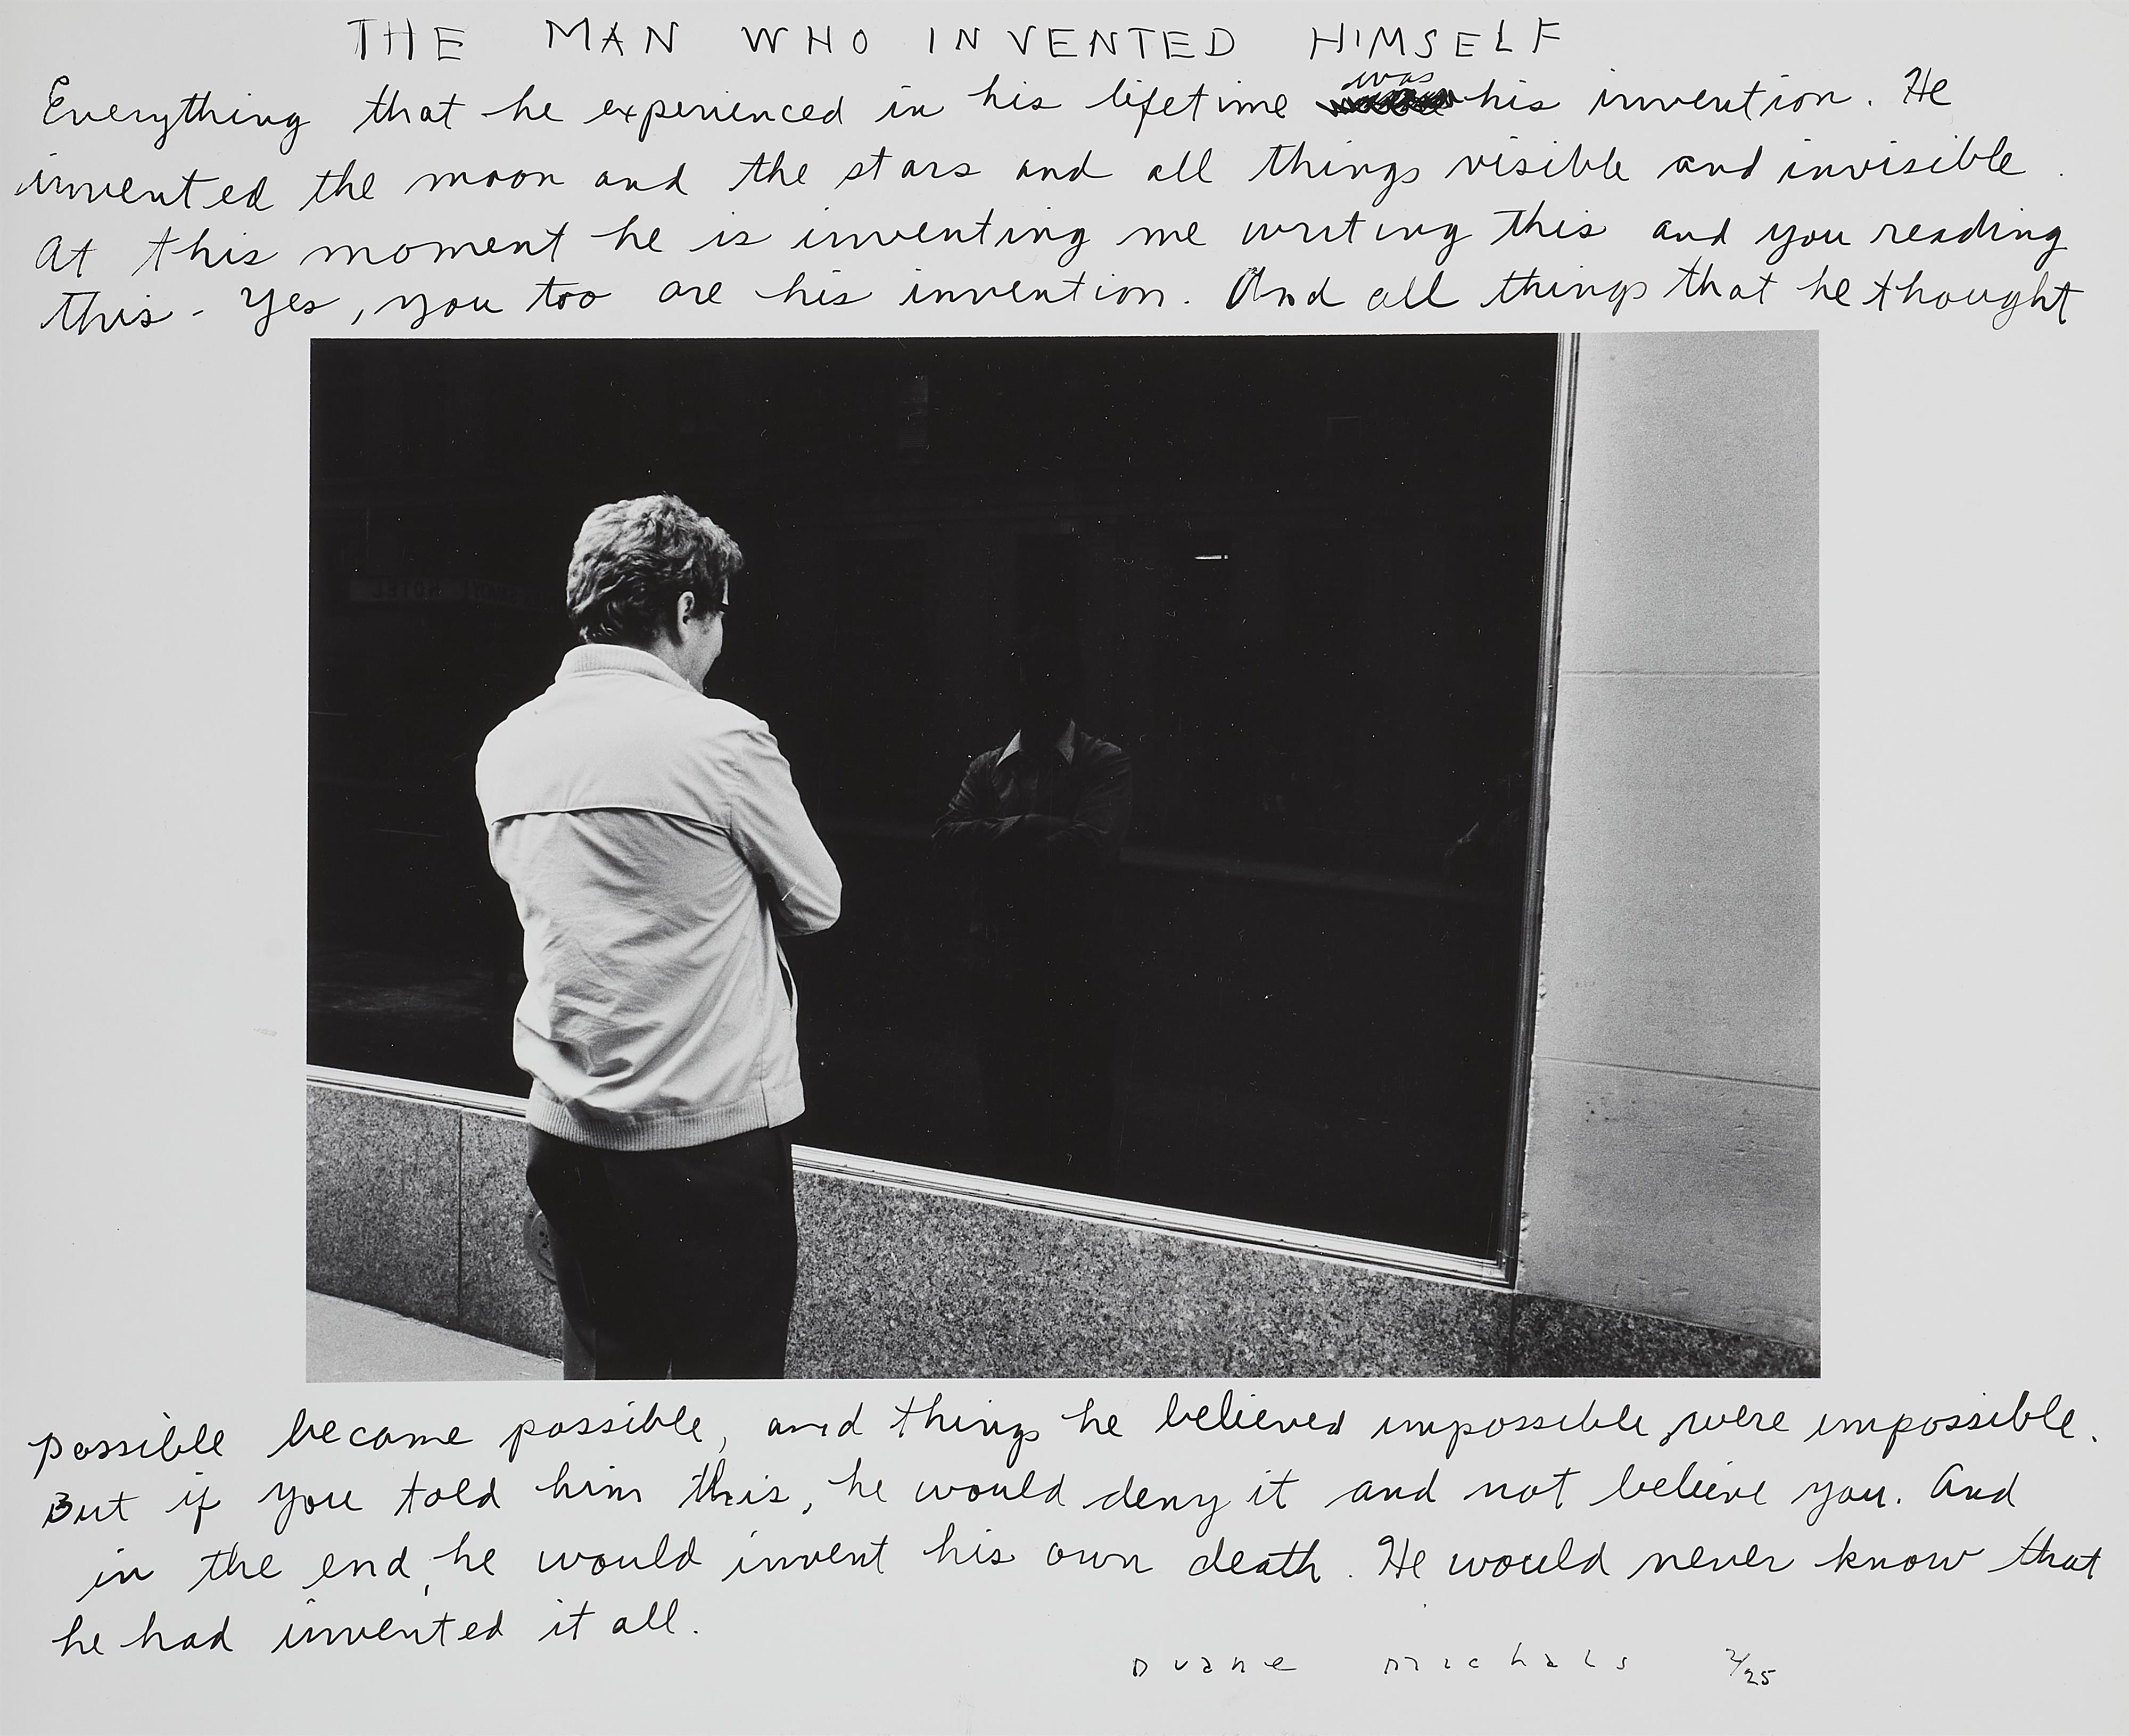 Duane Michals - The Man who invented himself - image-1